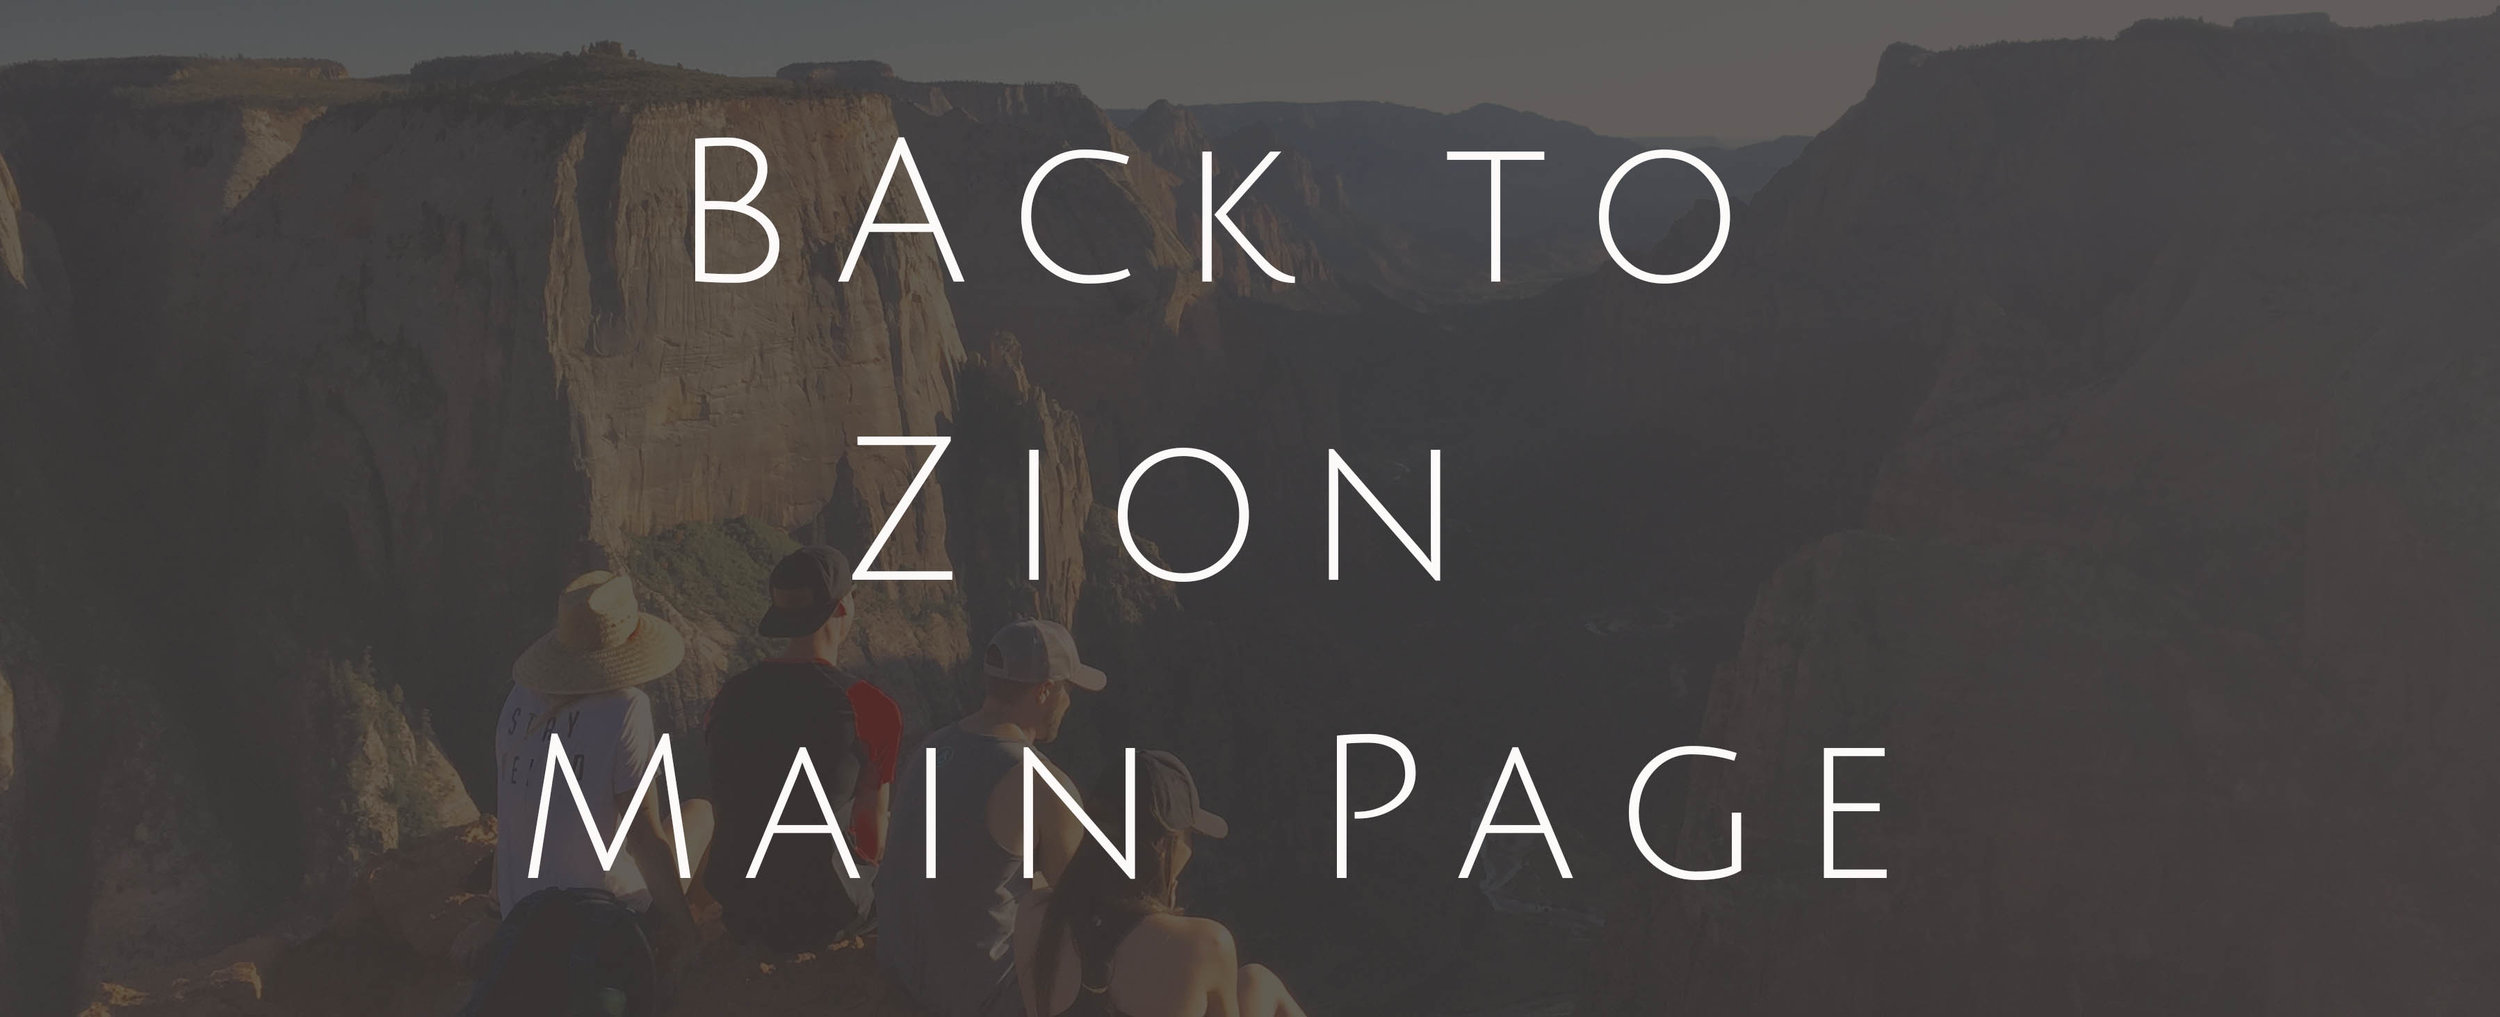 Back to Zion Main Page 2.jpg